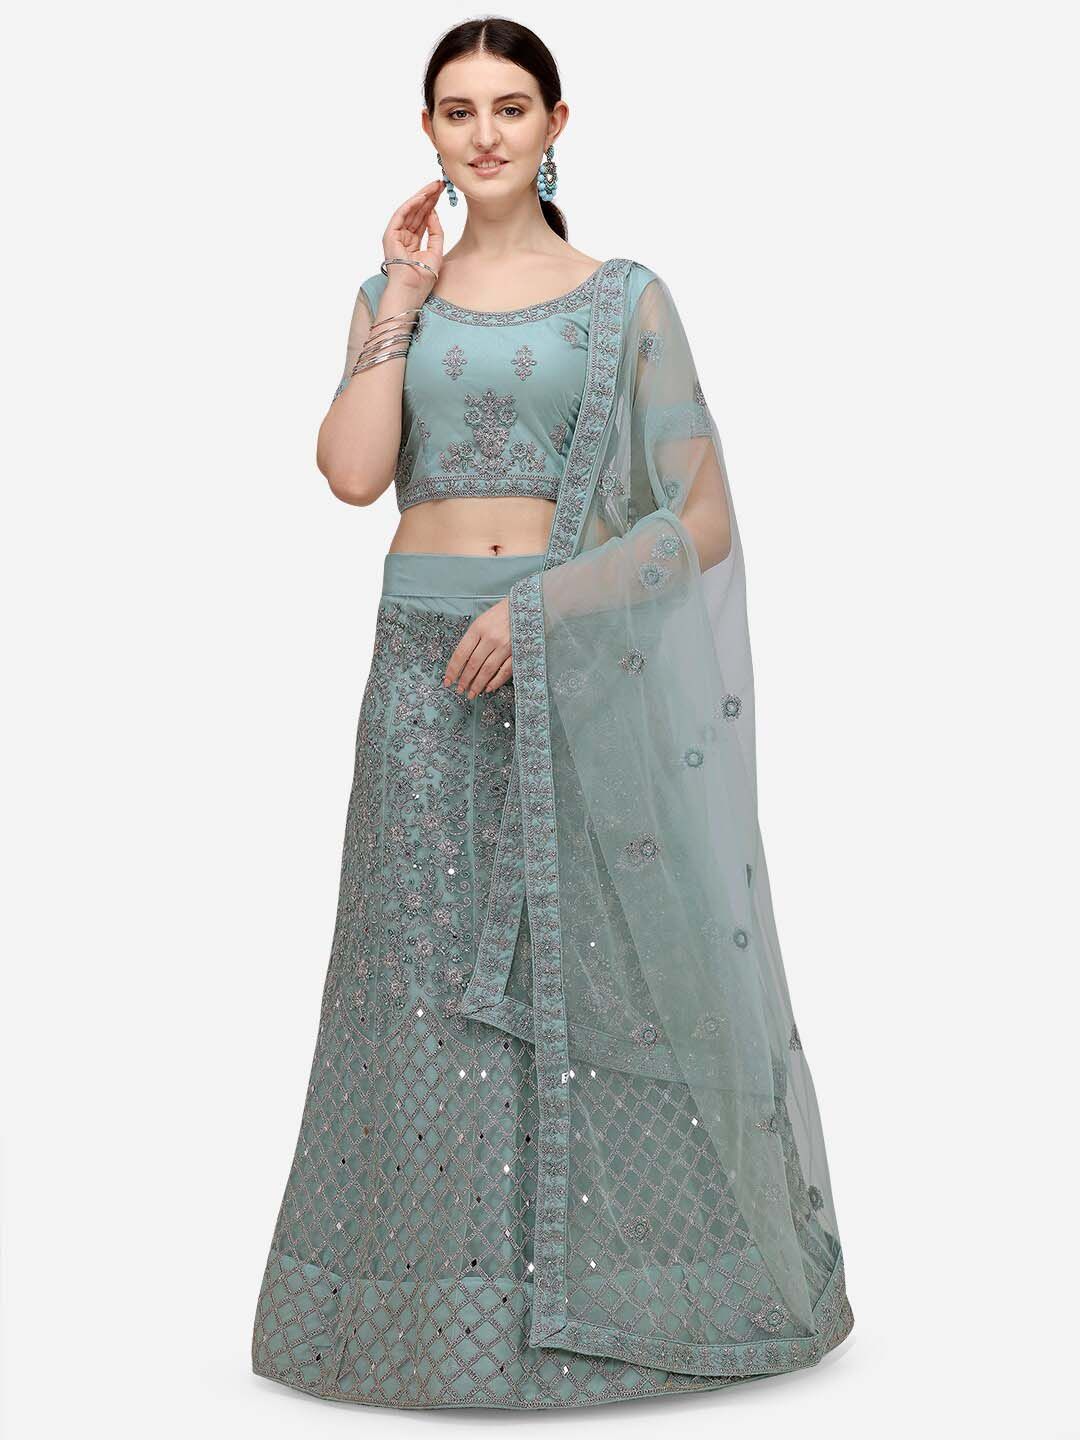 VRSALES Turquoise Blue & Silver-Toned Semi-Stitched Lehenga & Unstitched Blouse & Dupatta Price in India